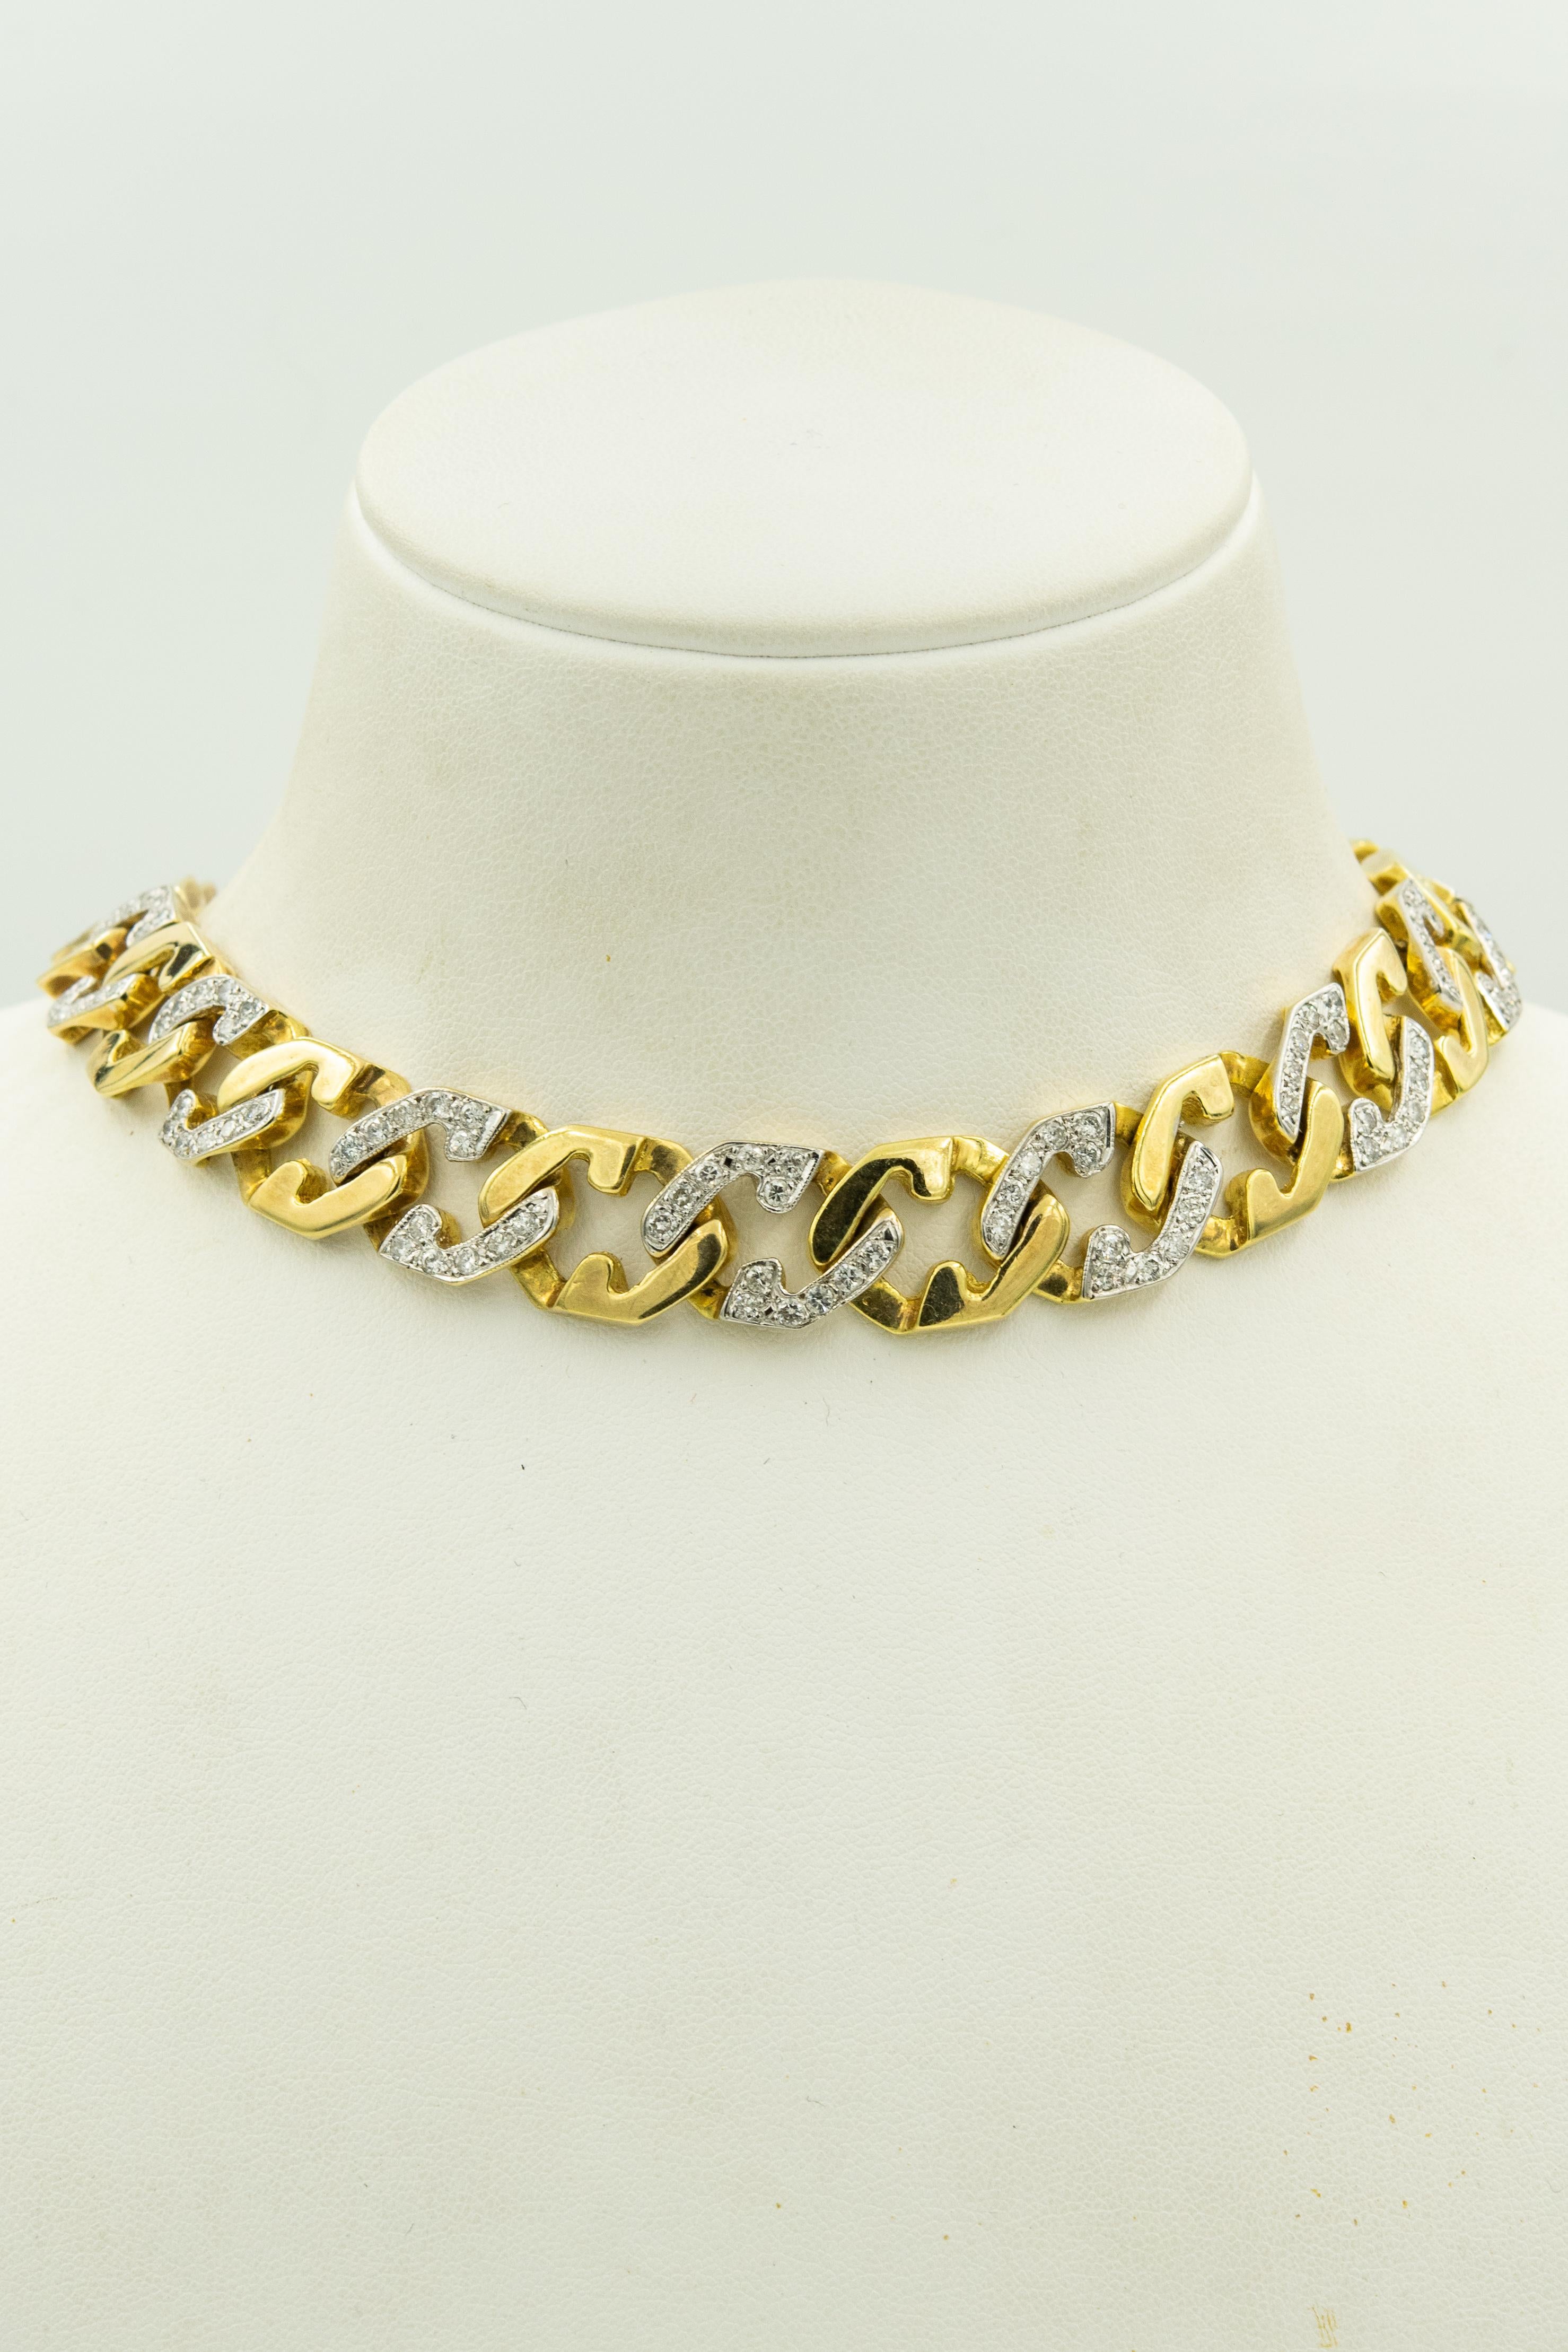 Stunning necklace featuring alternating shiny finish and diamond geometric links that are a bit over an 1/2